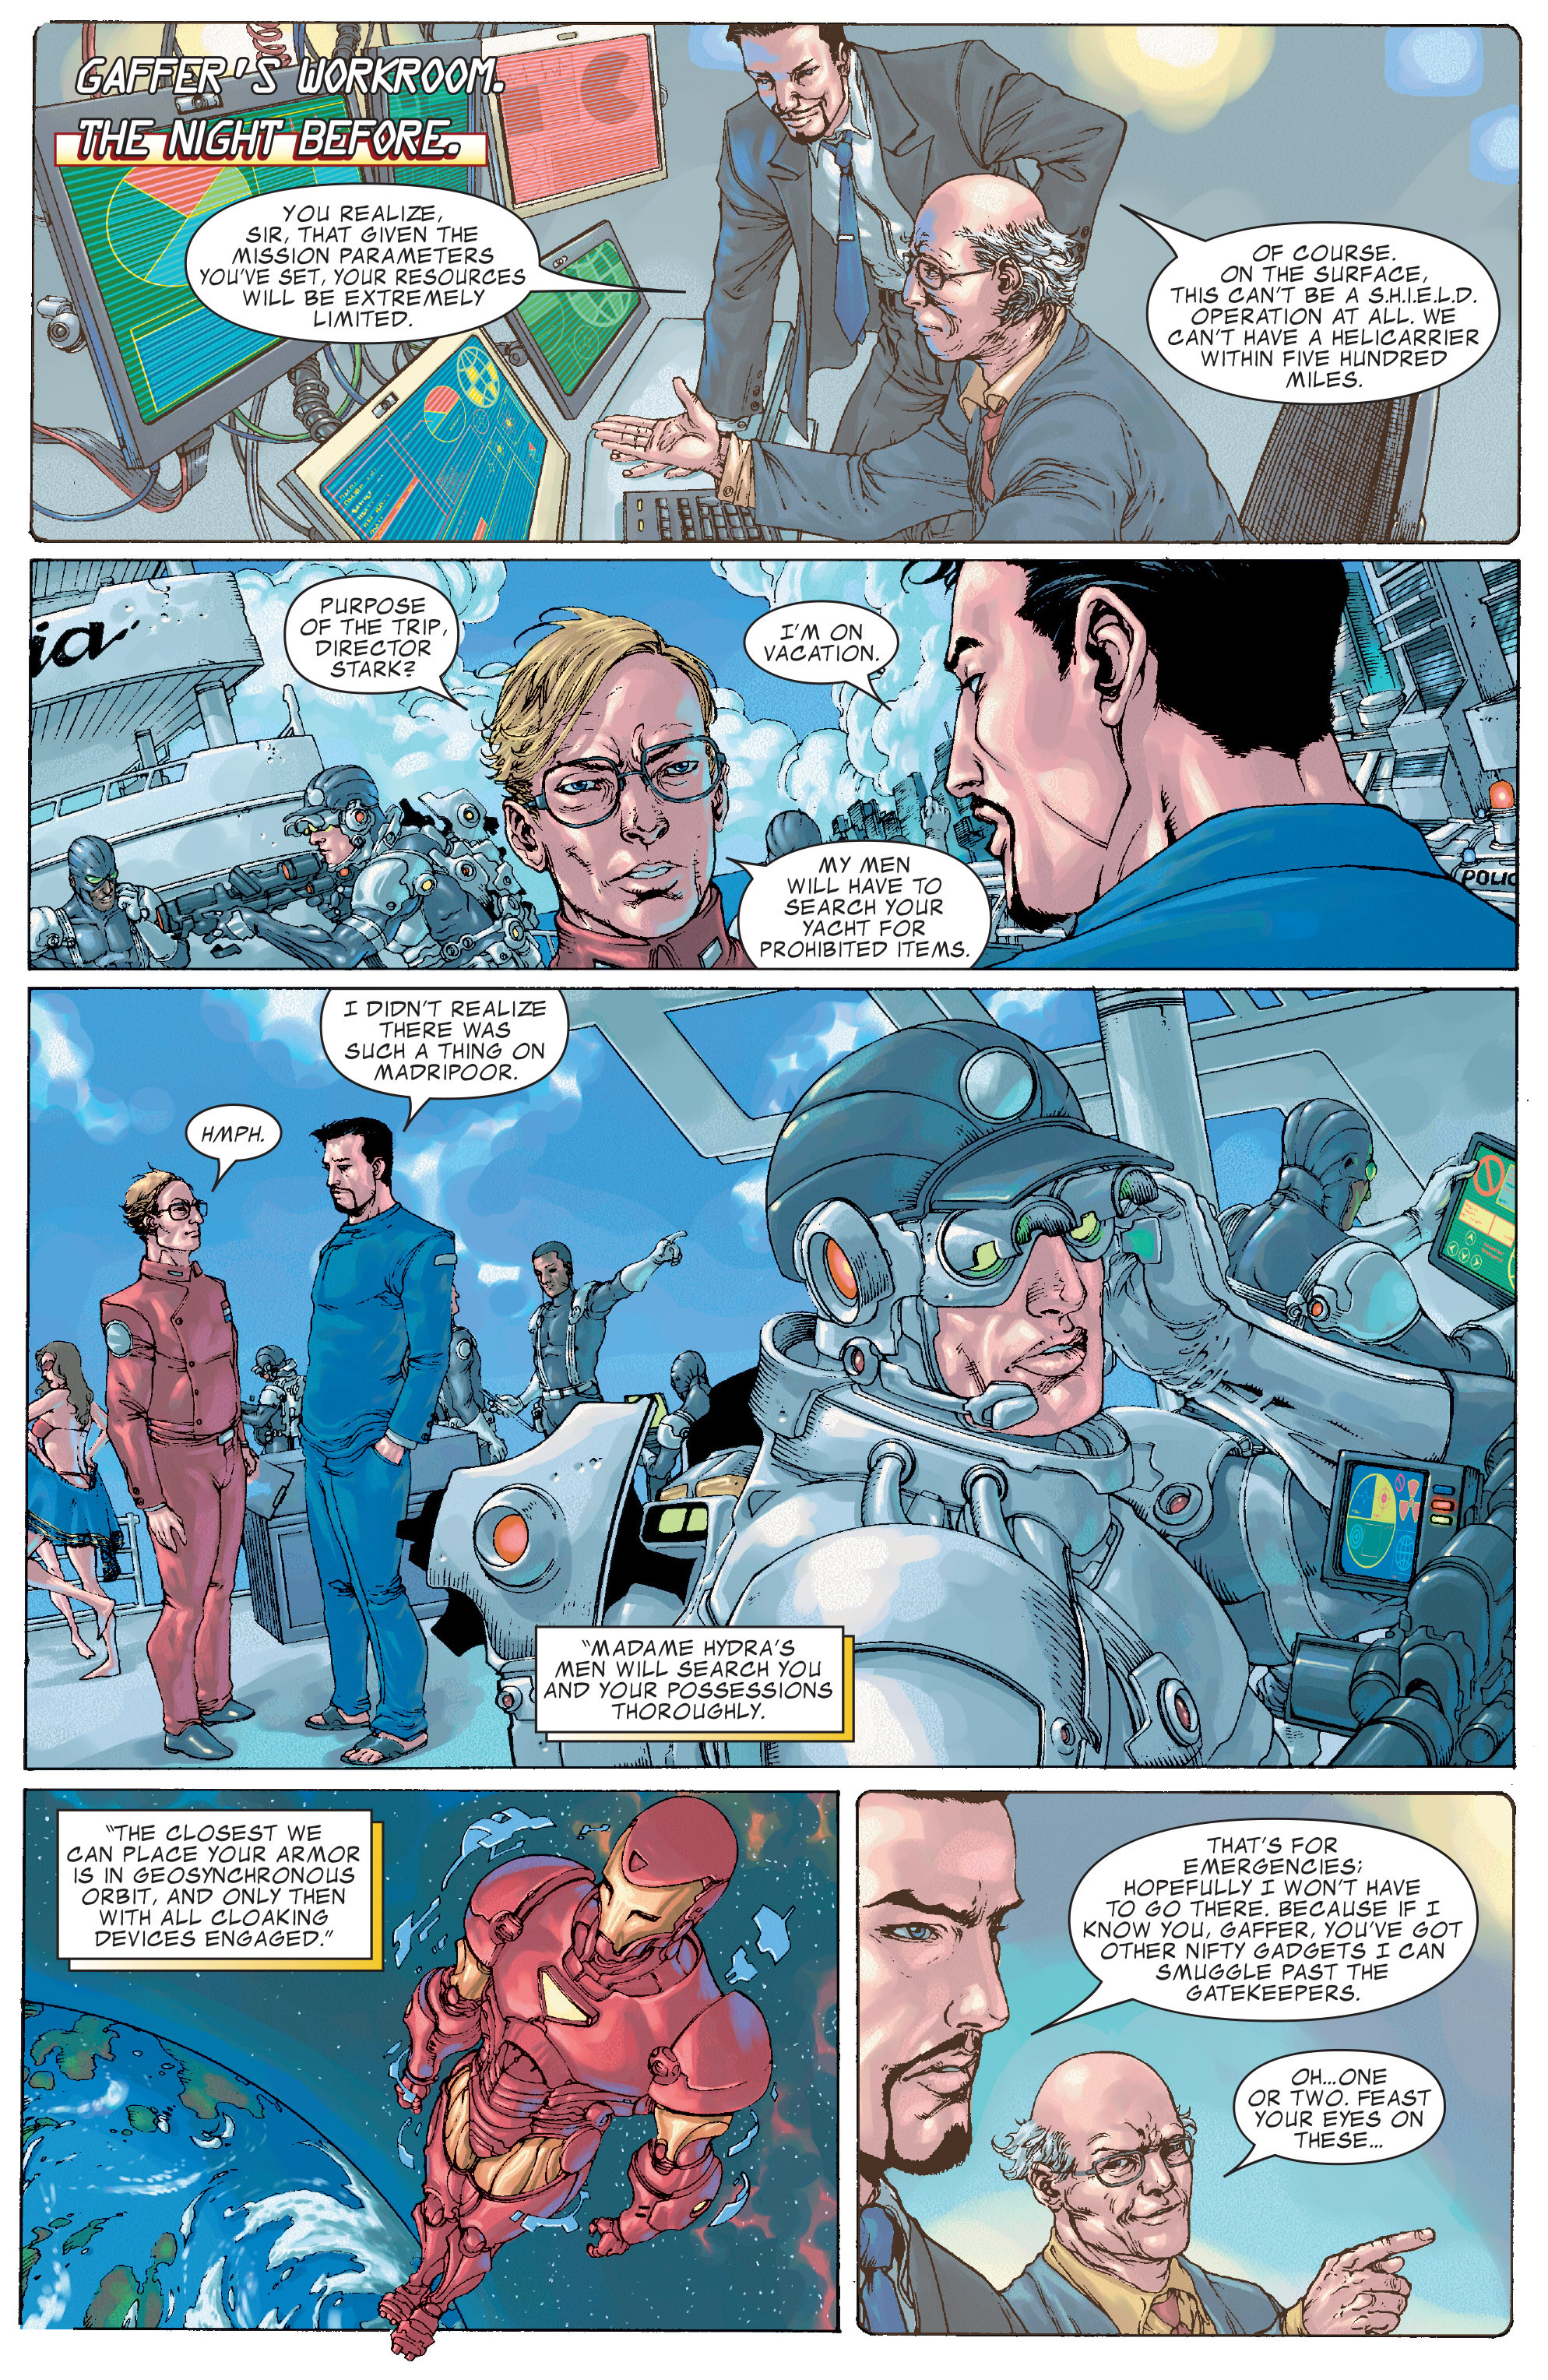 Iron Man: Director of S.H.I.E.L.D. Annual Full Page 7